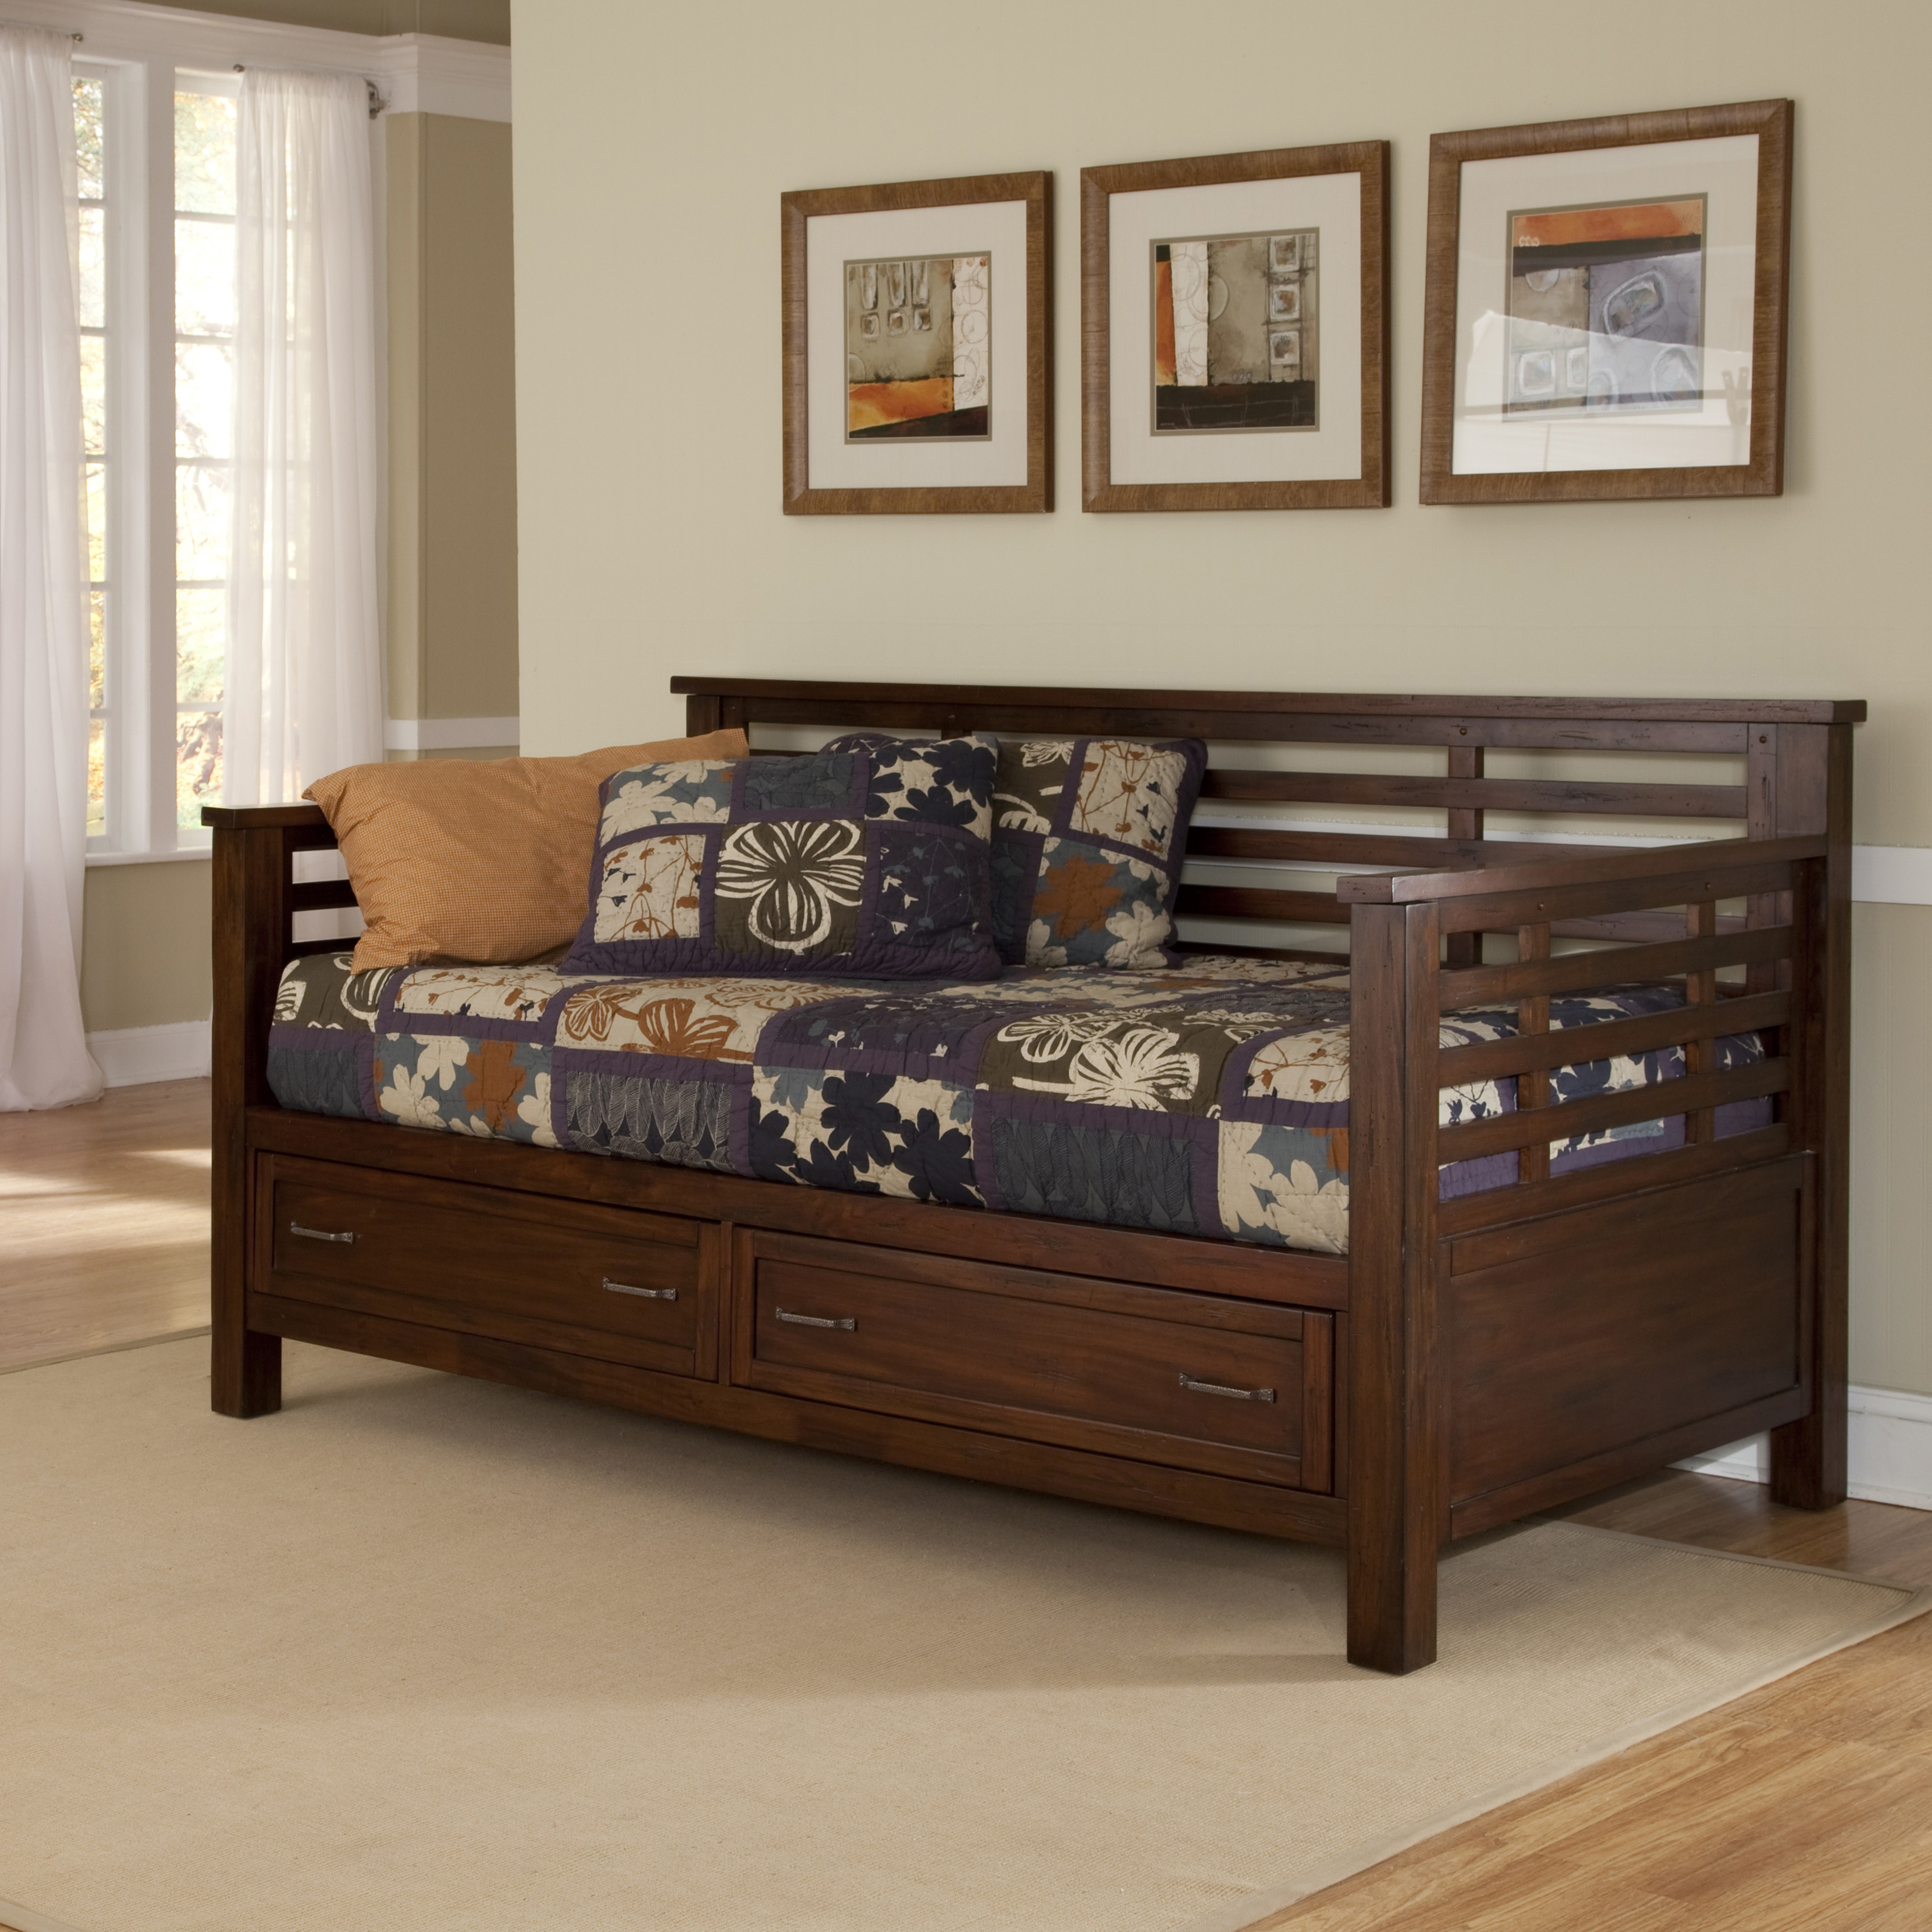 Mission style daybed 23